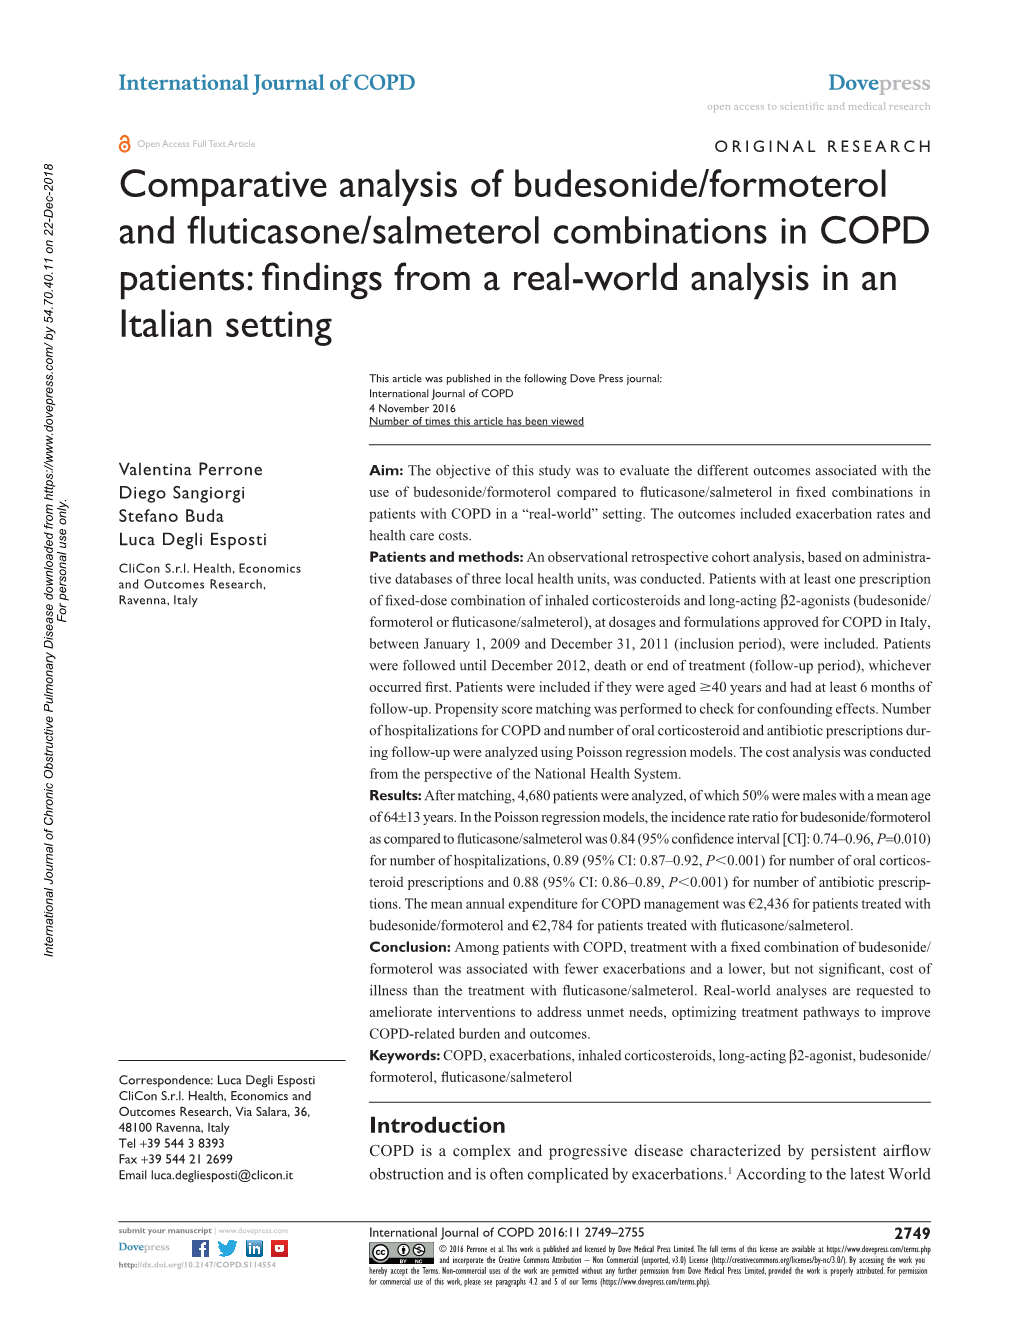 Comparative Analysis of Budesonide/Formoterol and Fluticasone/Salmeterol Combinations in COPD Patients: Findings from a Real-World Analysis in an Italian Setting